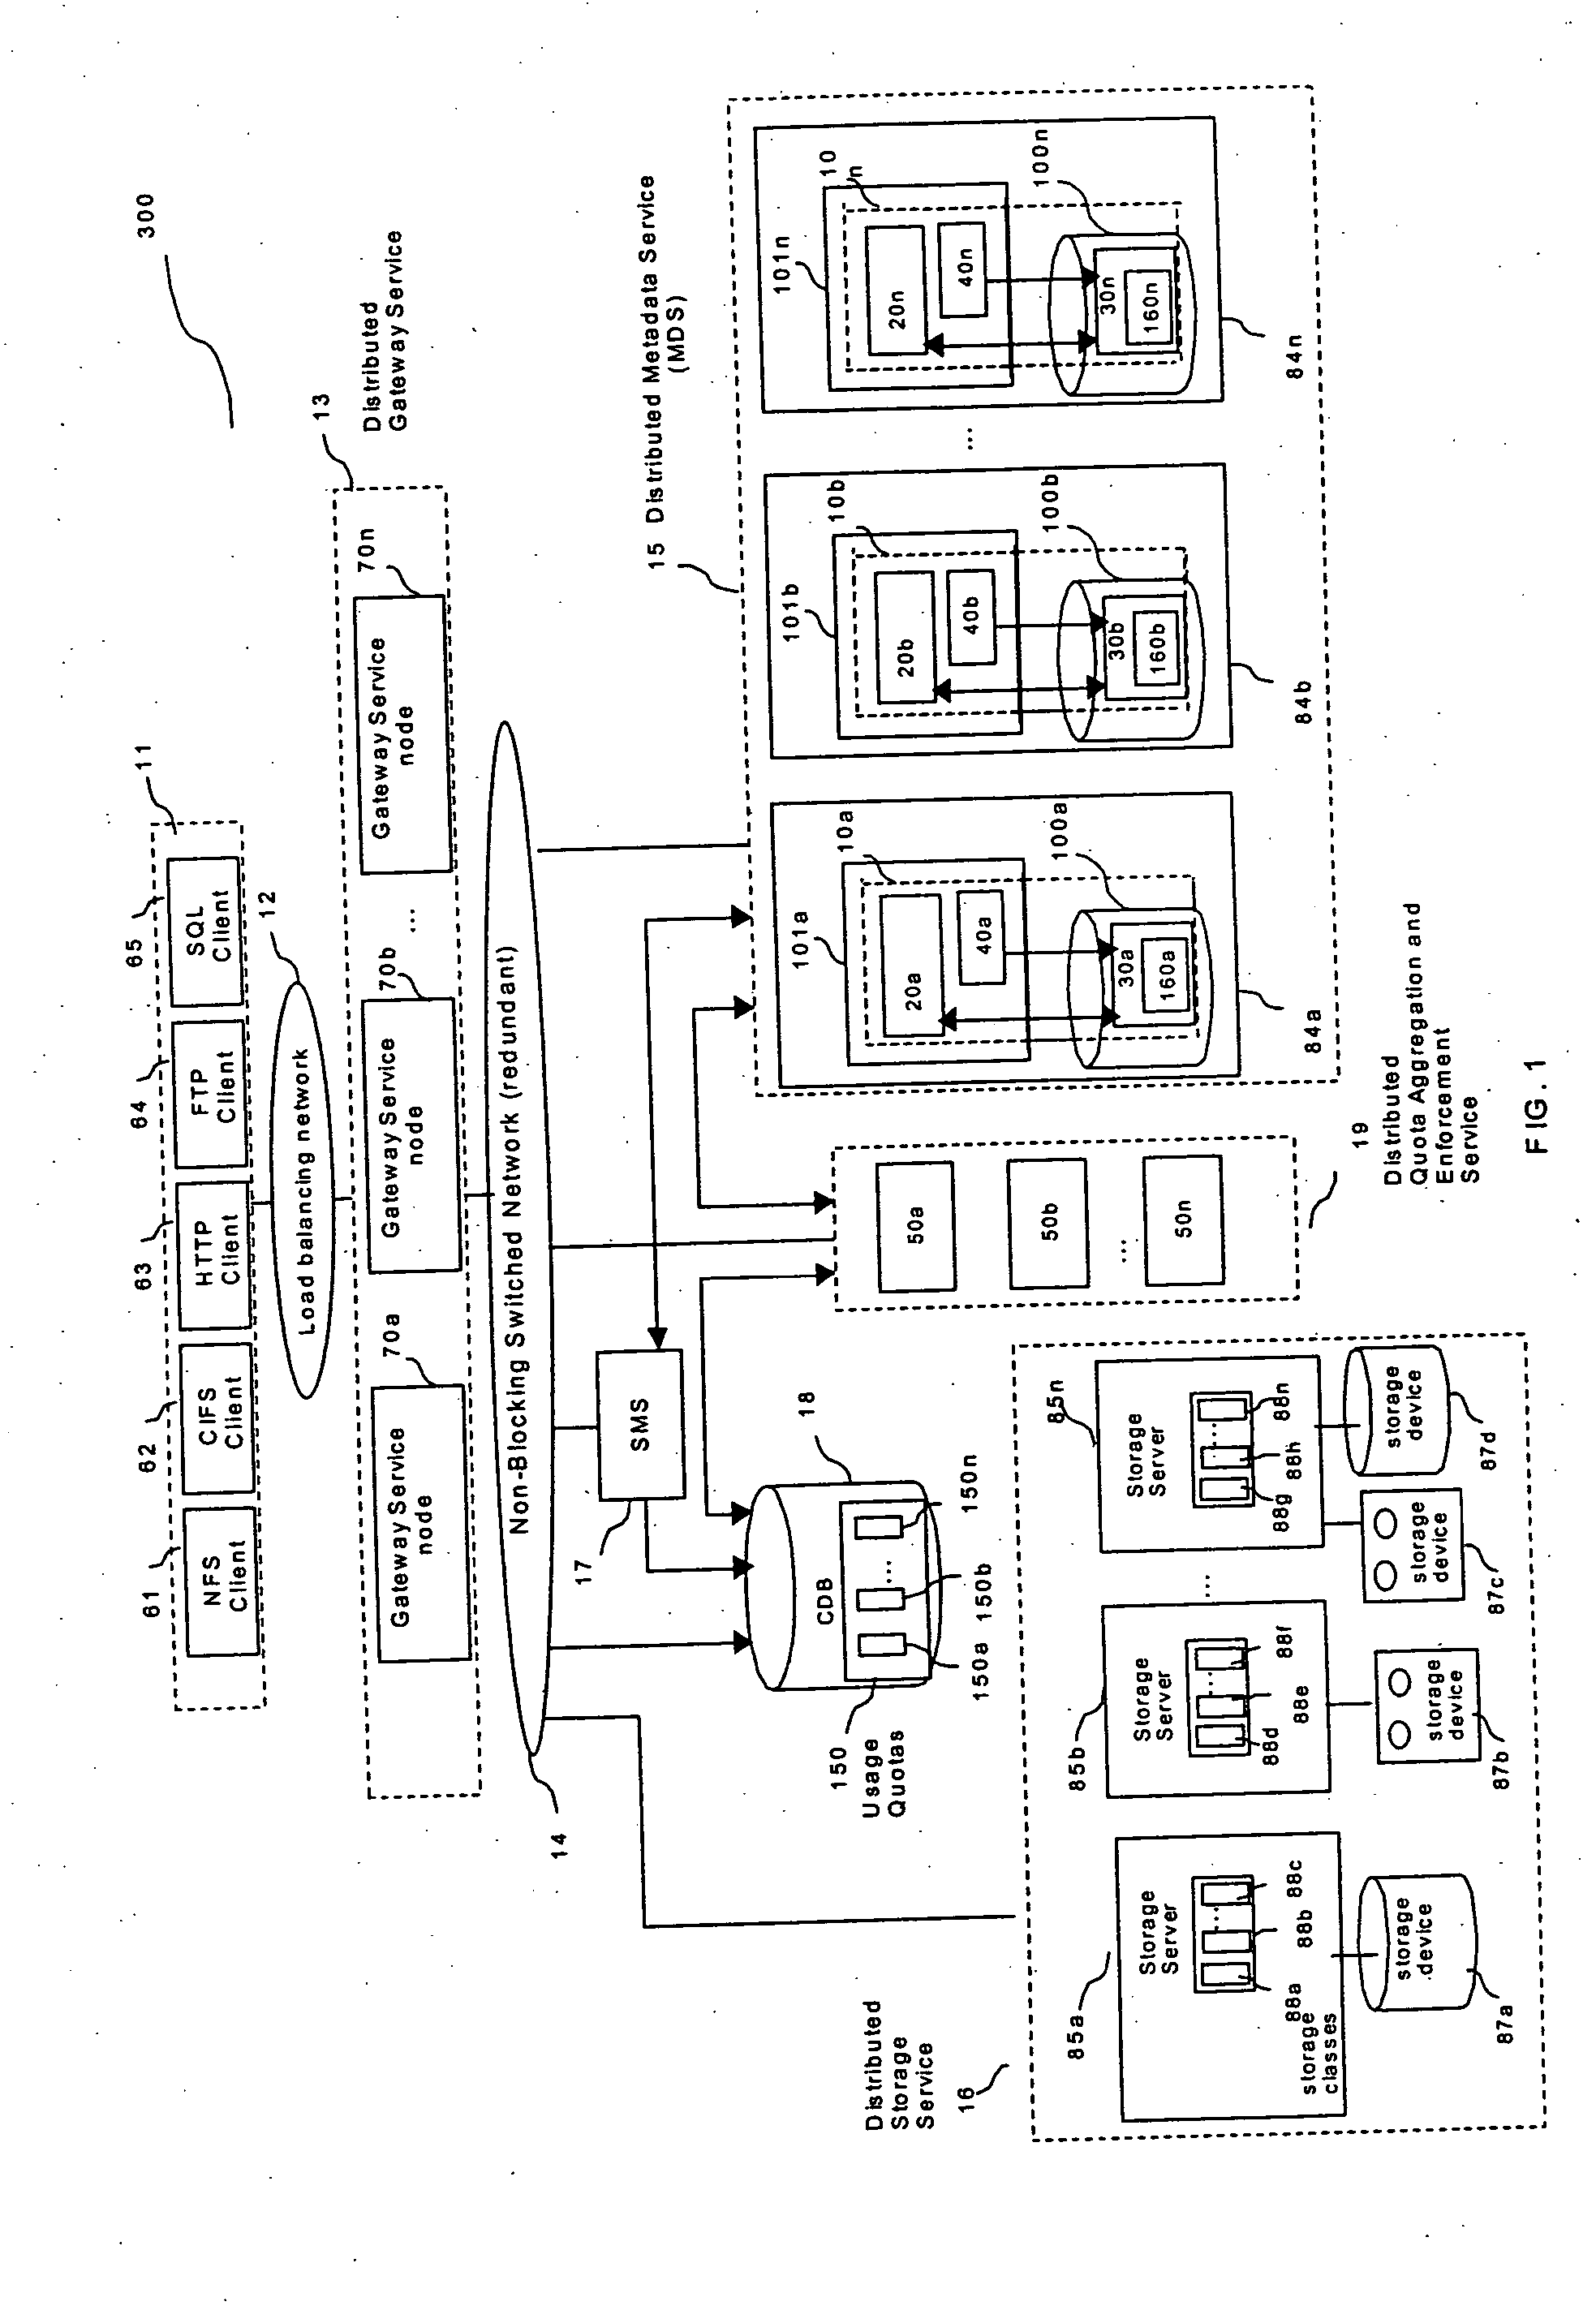 System and method for managing usage quotas